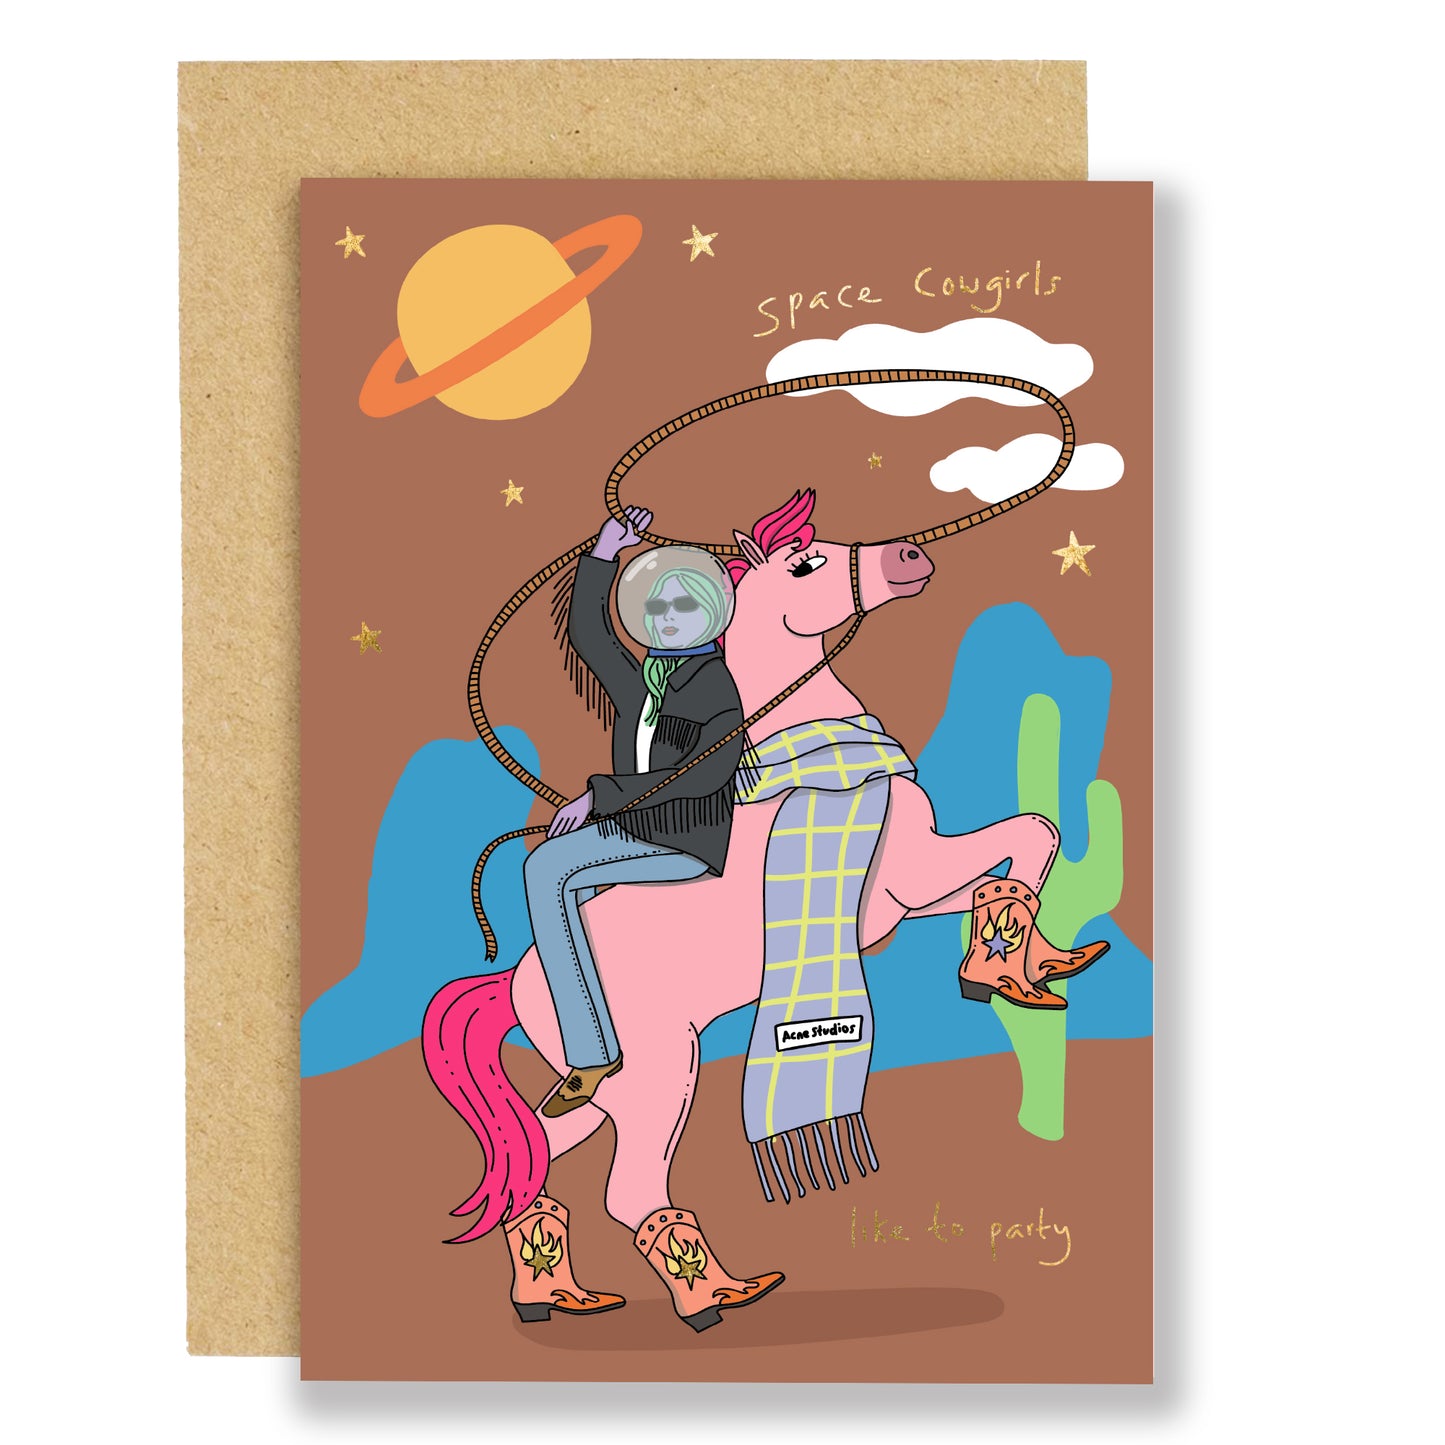 Space cowgirl